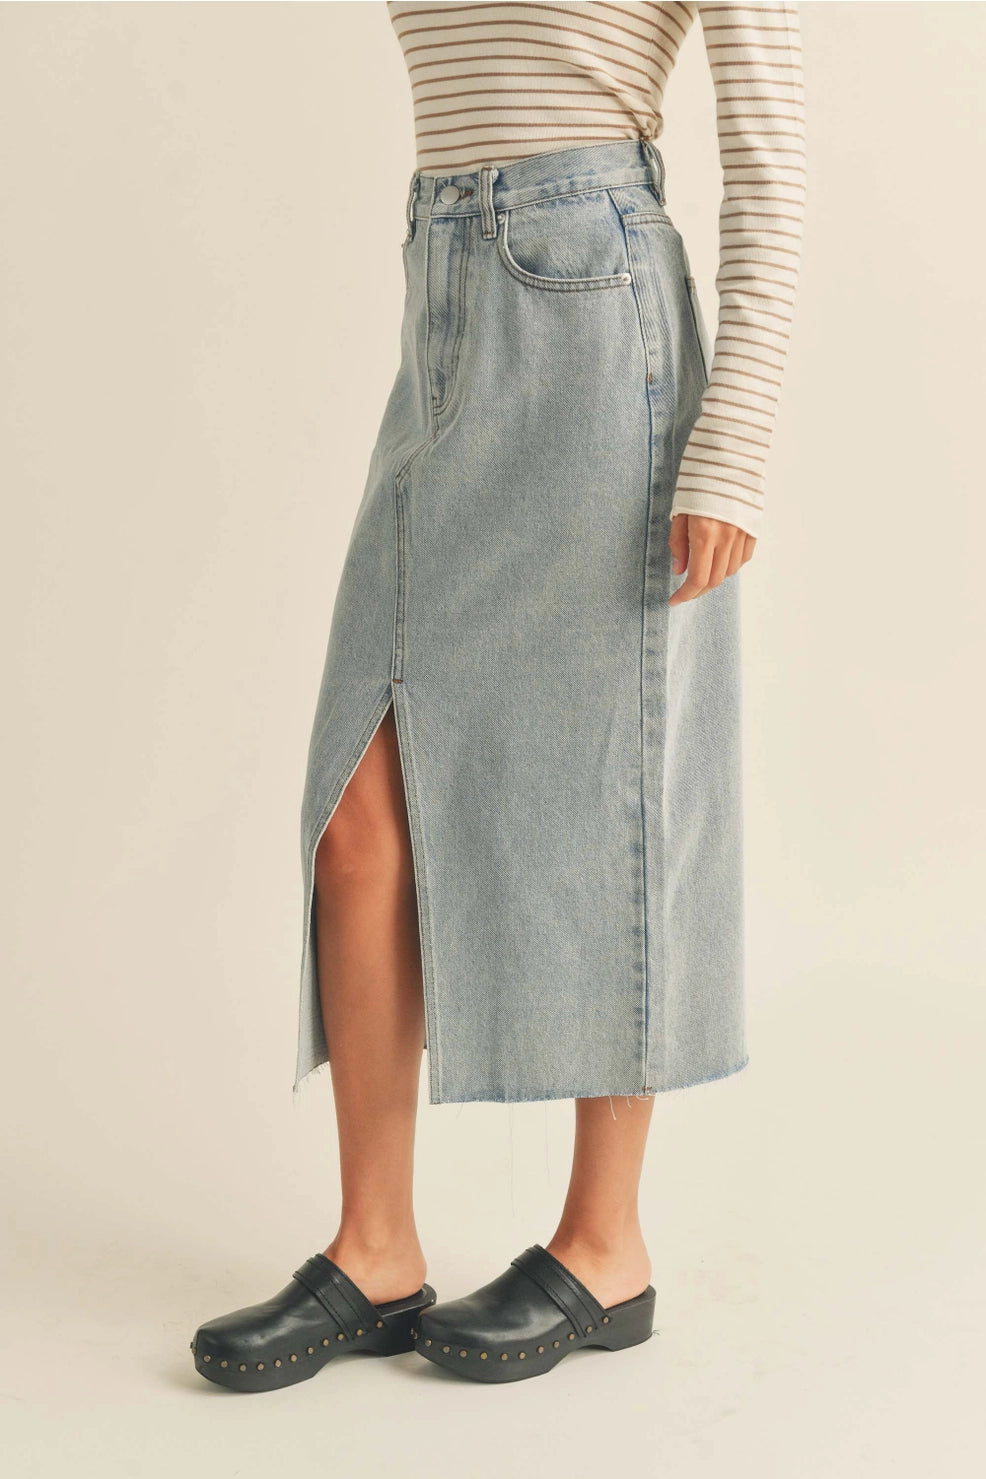 the Piper washed denim skirt